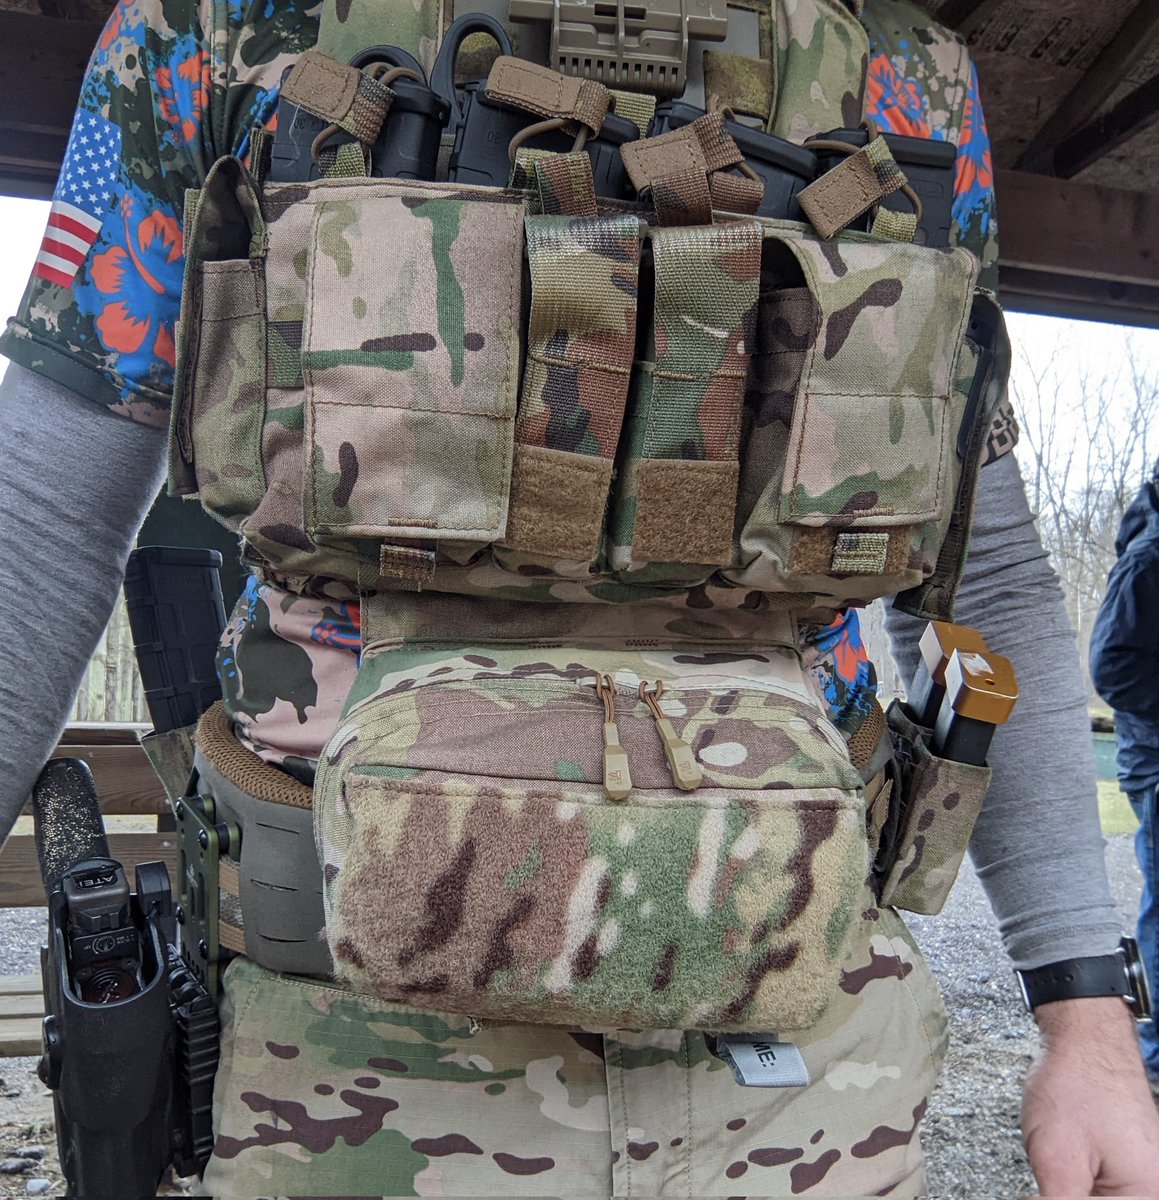 There is nothing weird about civilians owning body armor, plate carriers, and 'weapons of war'. It's 48 degrees and raining. Get outside, put on your kit, and touch grass.